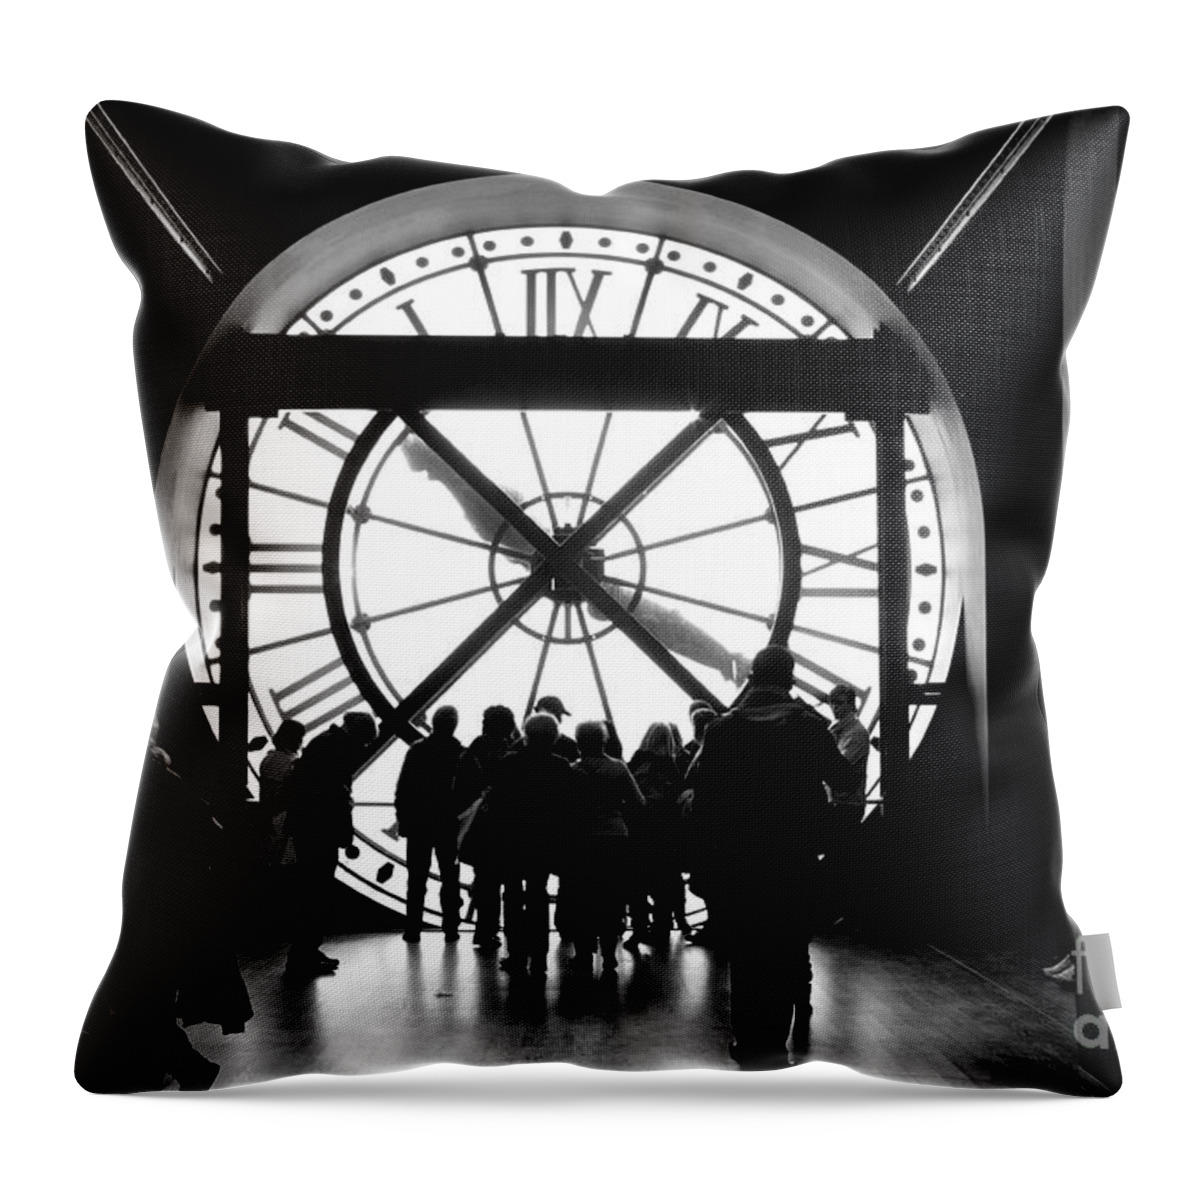 Time Throw Pillow featuring the photograph Are We In Time... by Donato Iannuzzi